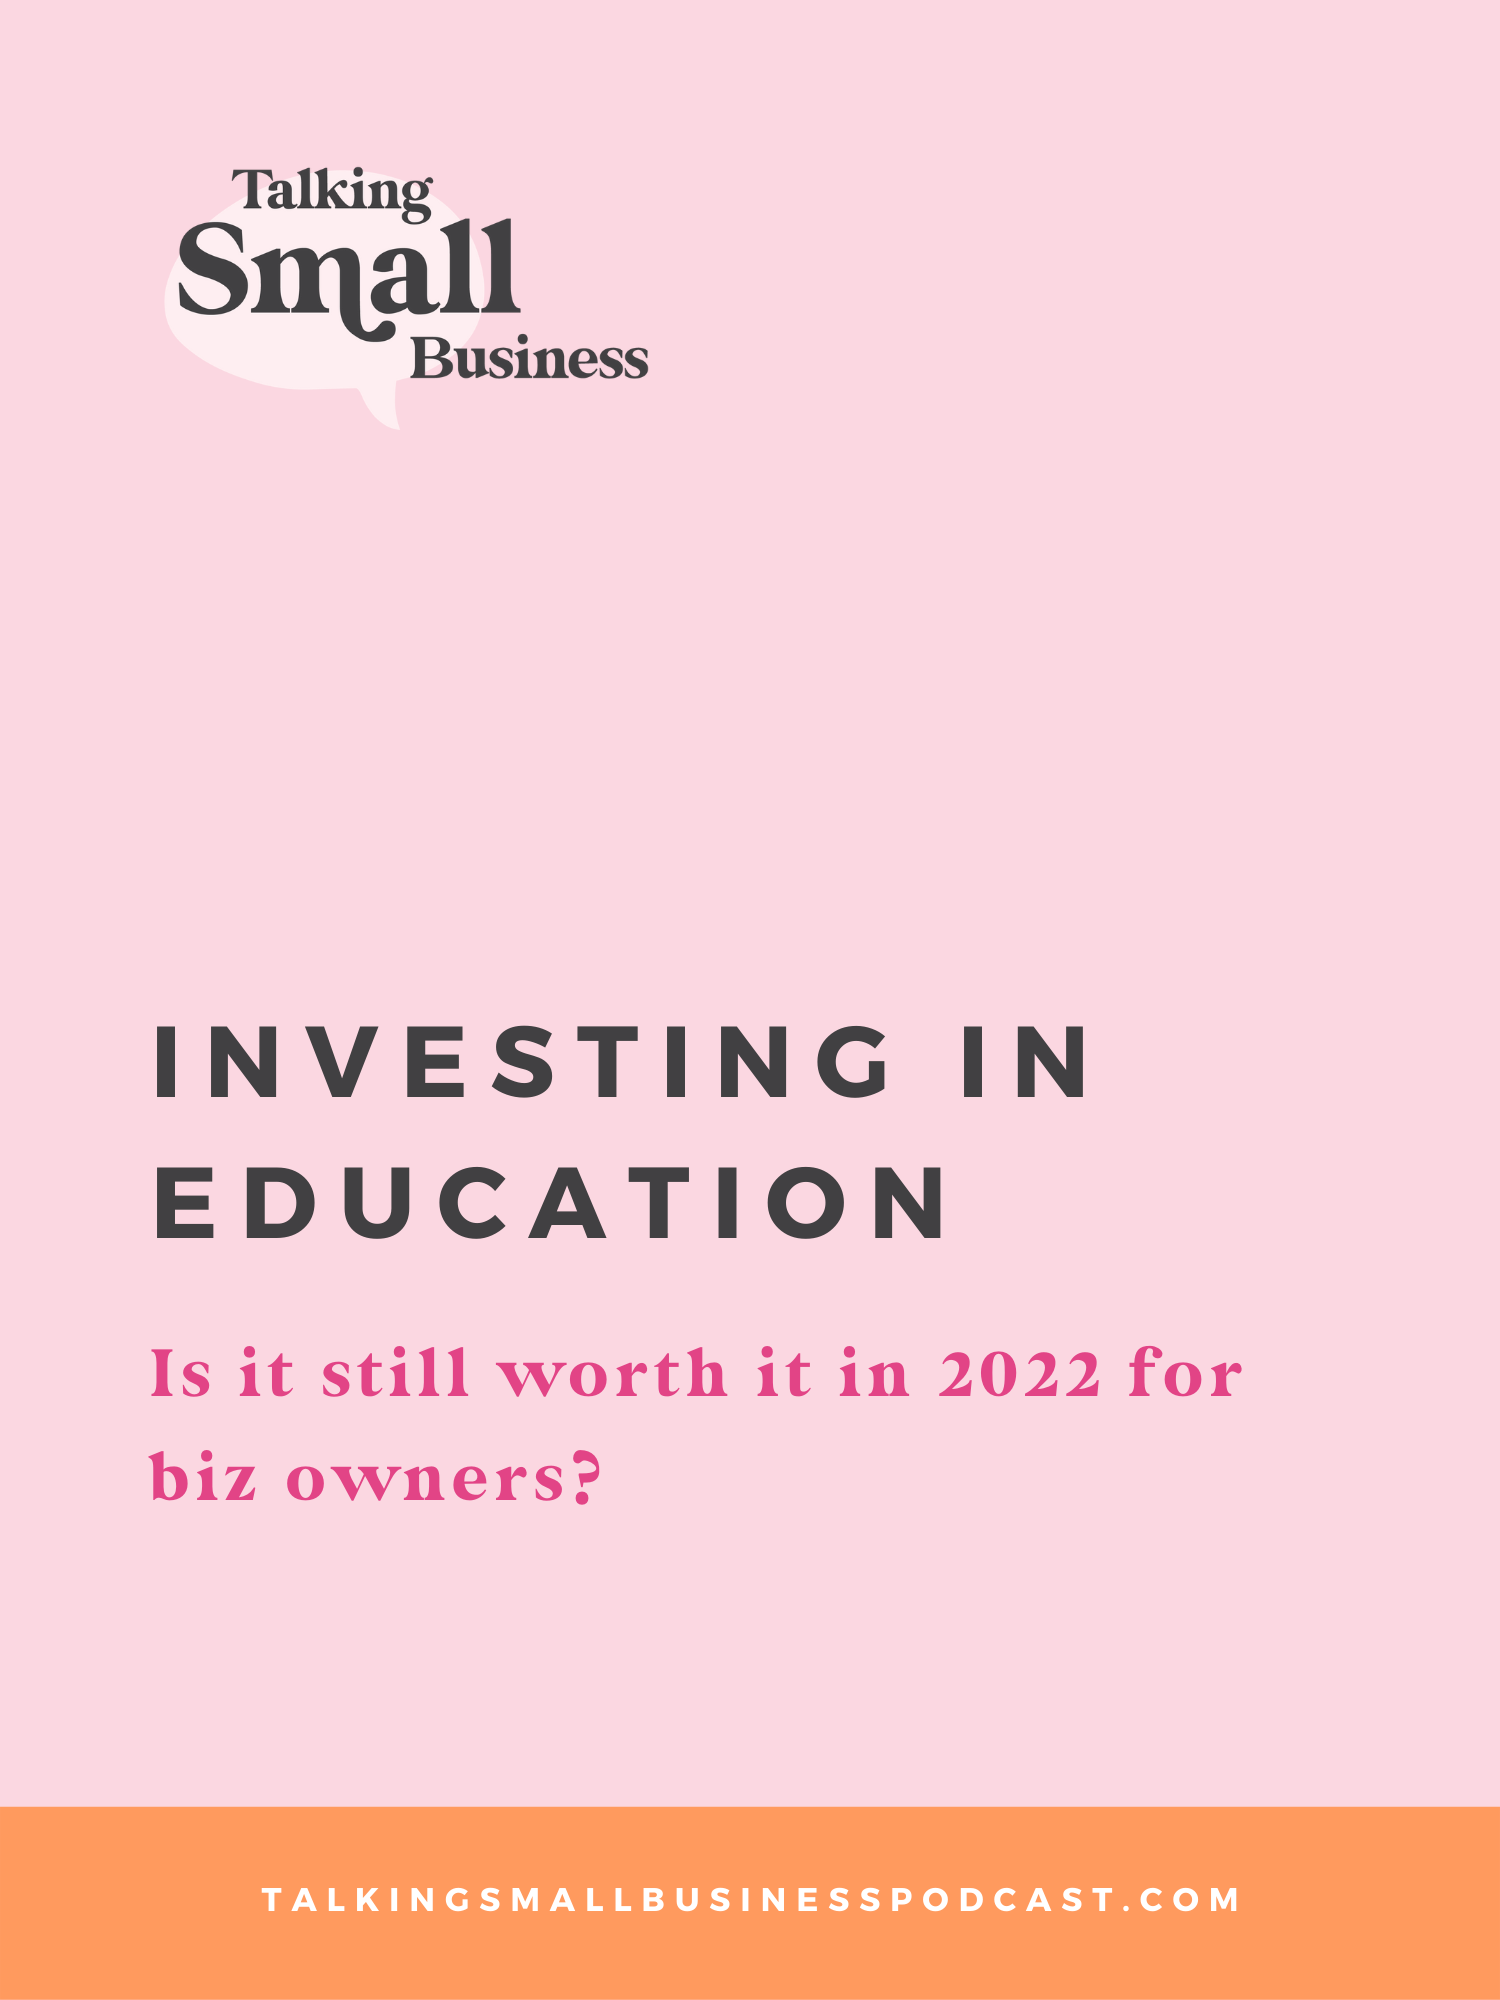 Investing in Education as a Small Business Owner: Kat Schmoyer and Megan Martin discuss whether or not education is a worthwhile investment